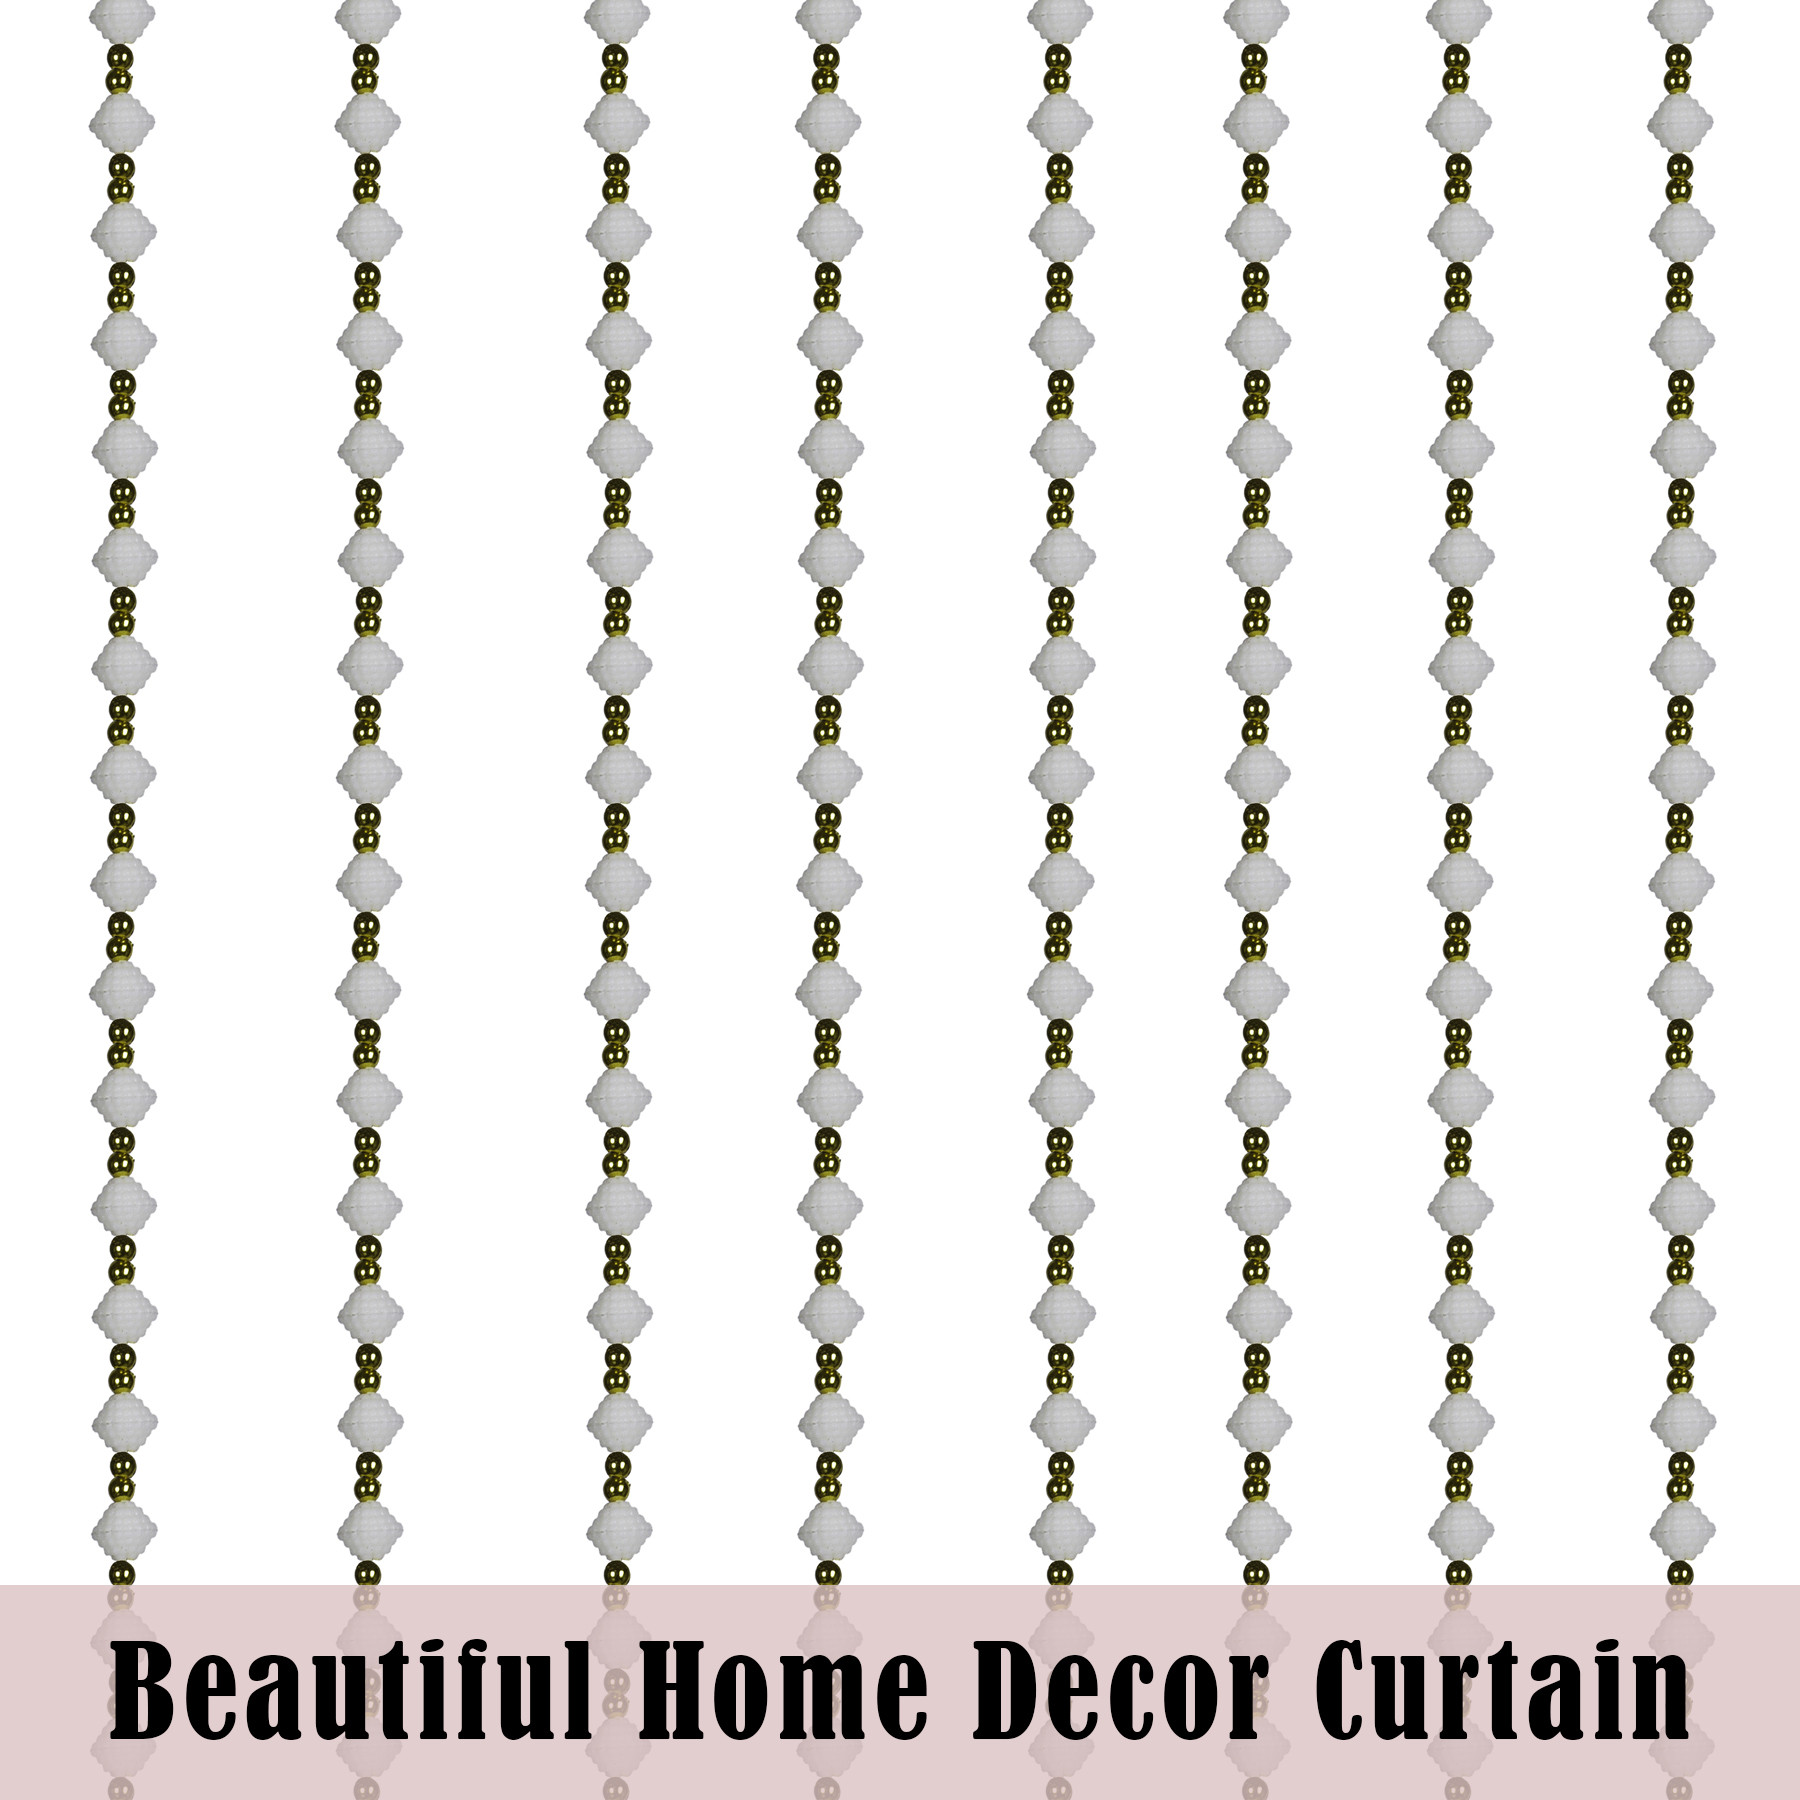 Kuber Industries String Curtain | Fancy Sparkling Door Curtains for Home Décor | Pooja Room String Curtains | String Beads Sheer Curtains | Angura Beads Curtain | 4x7 Feet | White